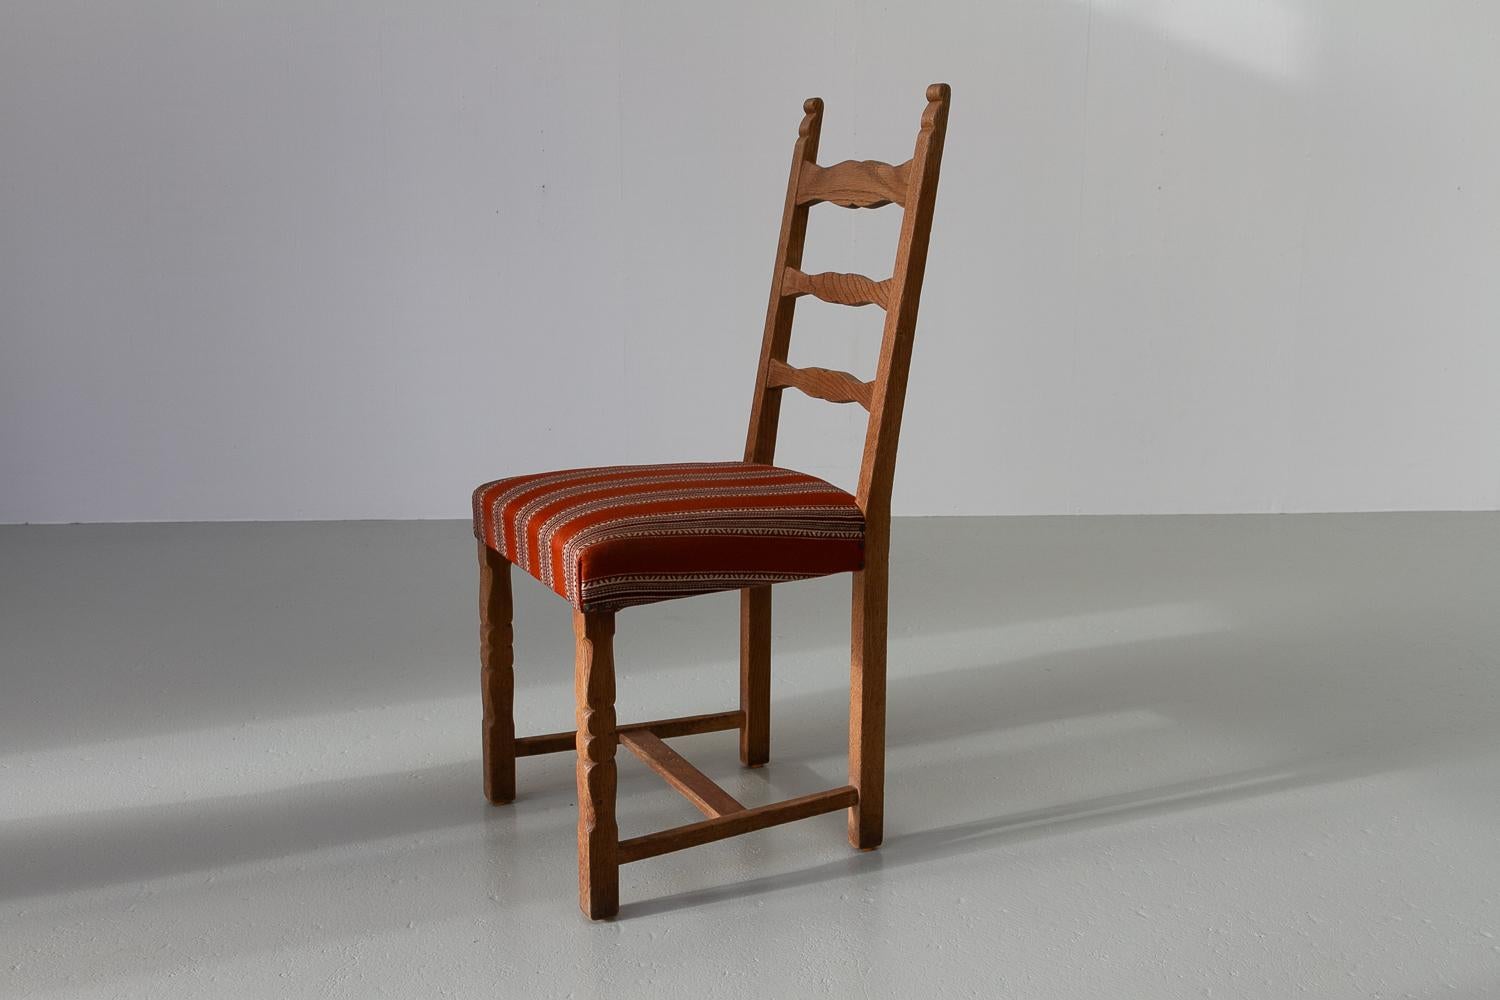 Vintage Danish Brutalist Ladder Back Oak Dining Chair, 1960s. 

Scandinavian Mid-Century modern dining room chairs in Nordic oak. Very likely designed by Henning Kjærnulf, Denmark as he often incorporated a mix of baroque and brutalist details in